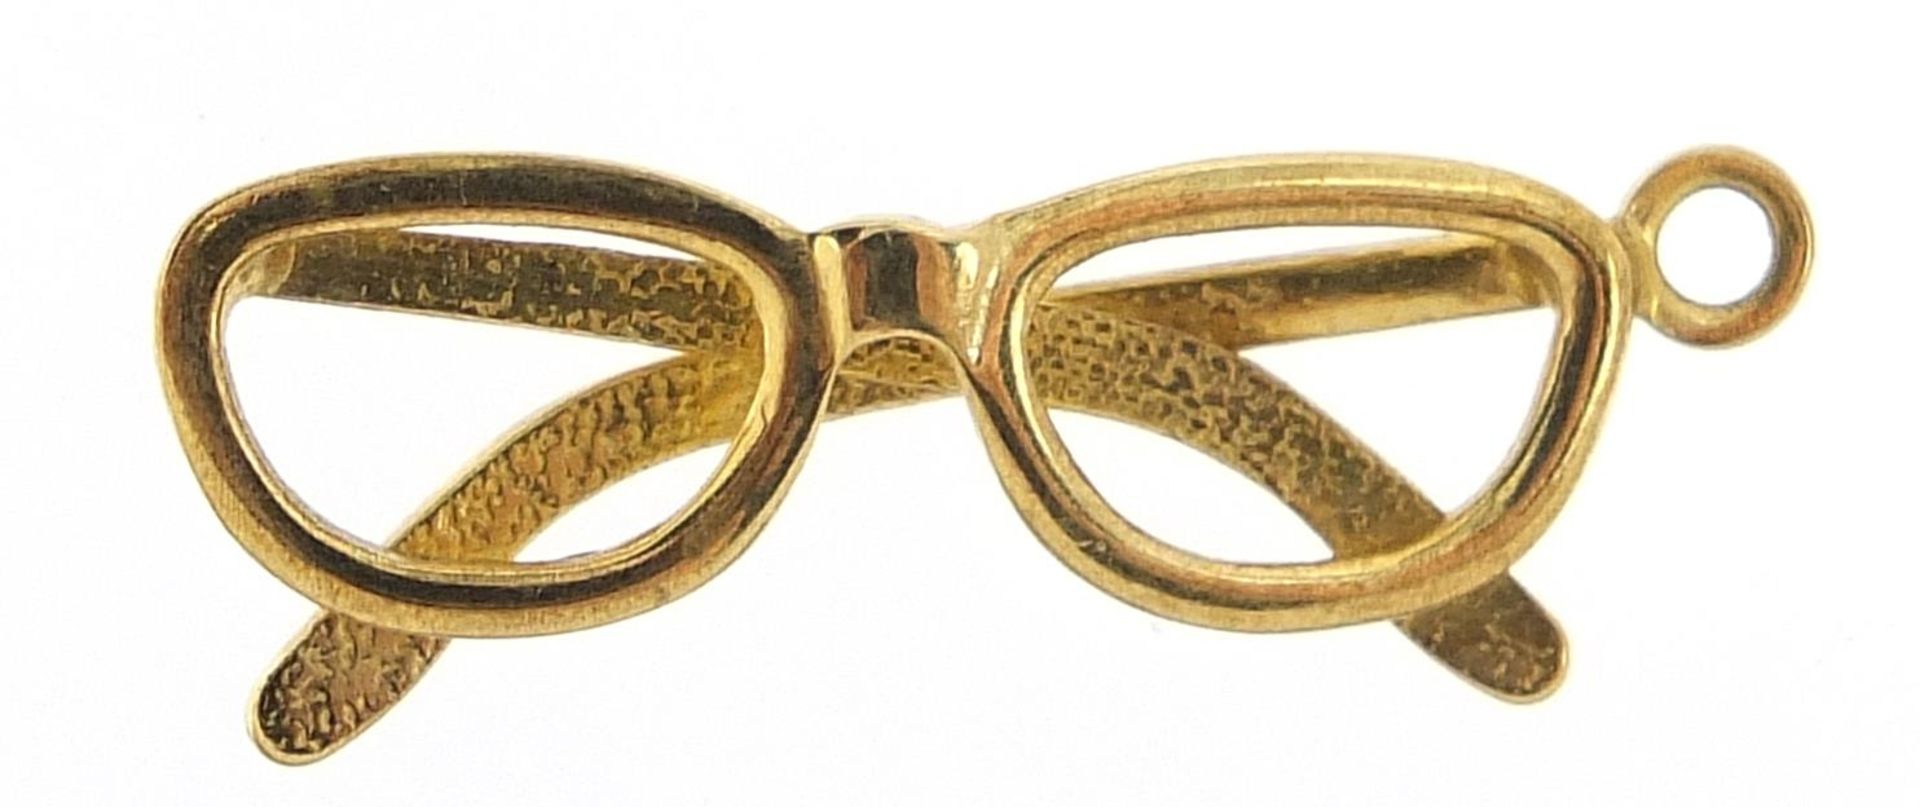 Unmarked gold pair of spectacles charm, (tests as 9ct gold) 2.2cm high, 1.3g